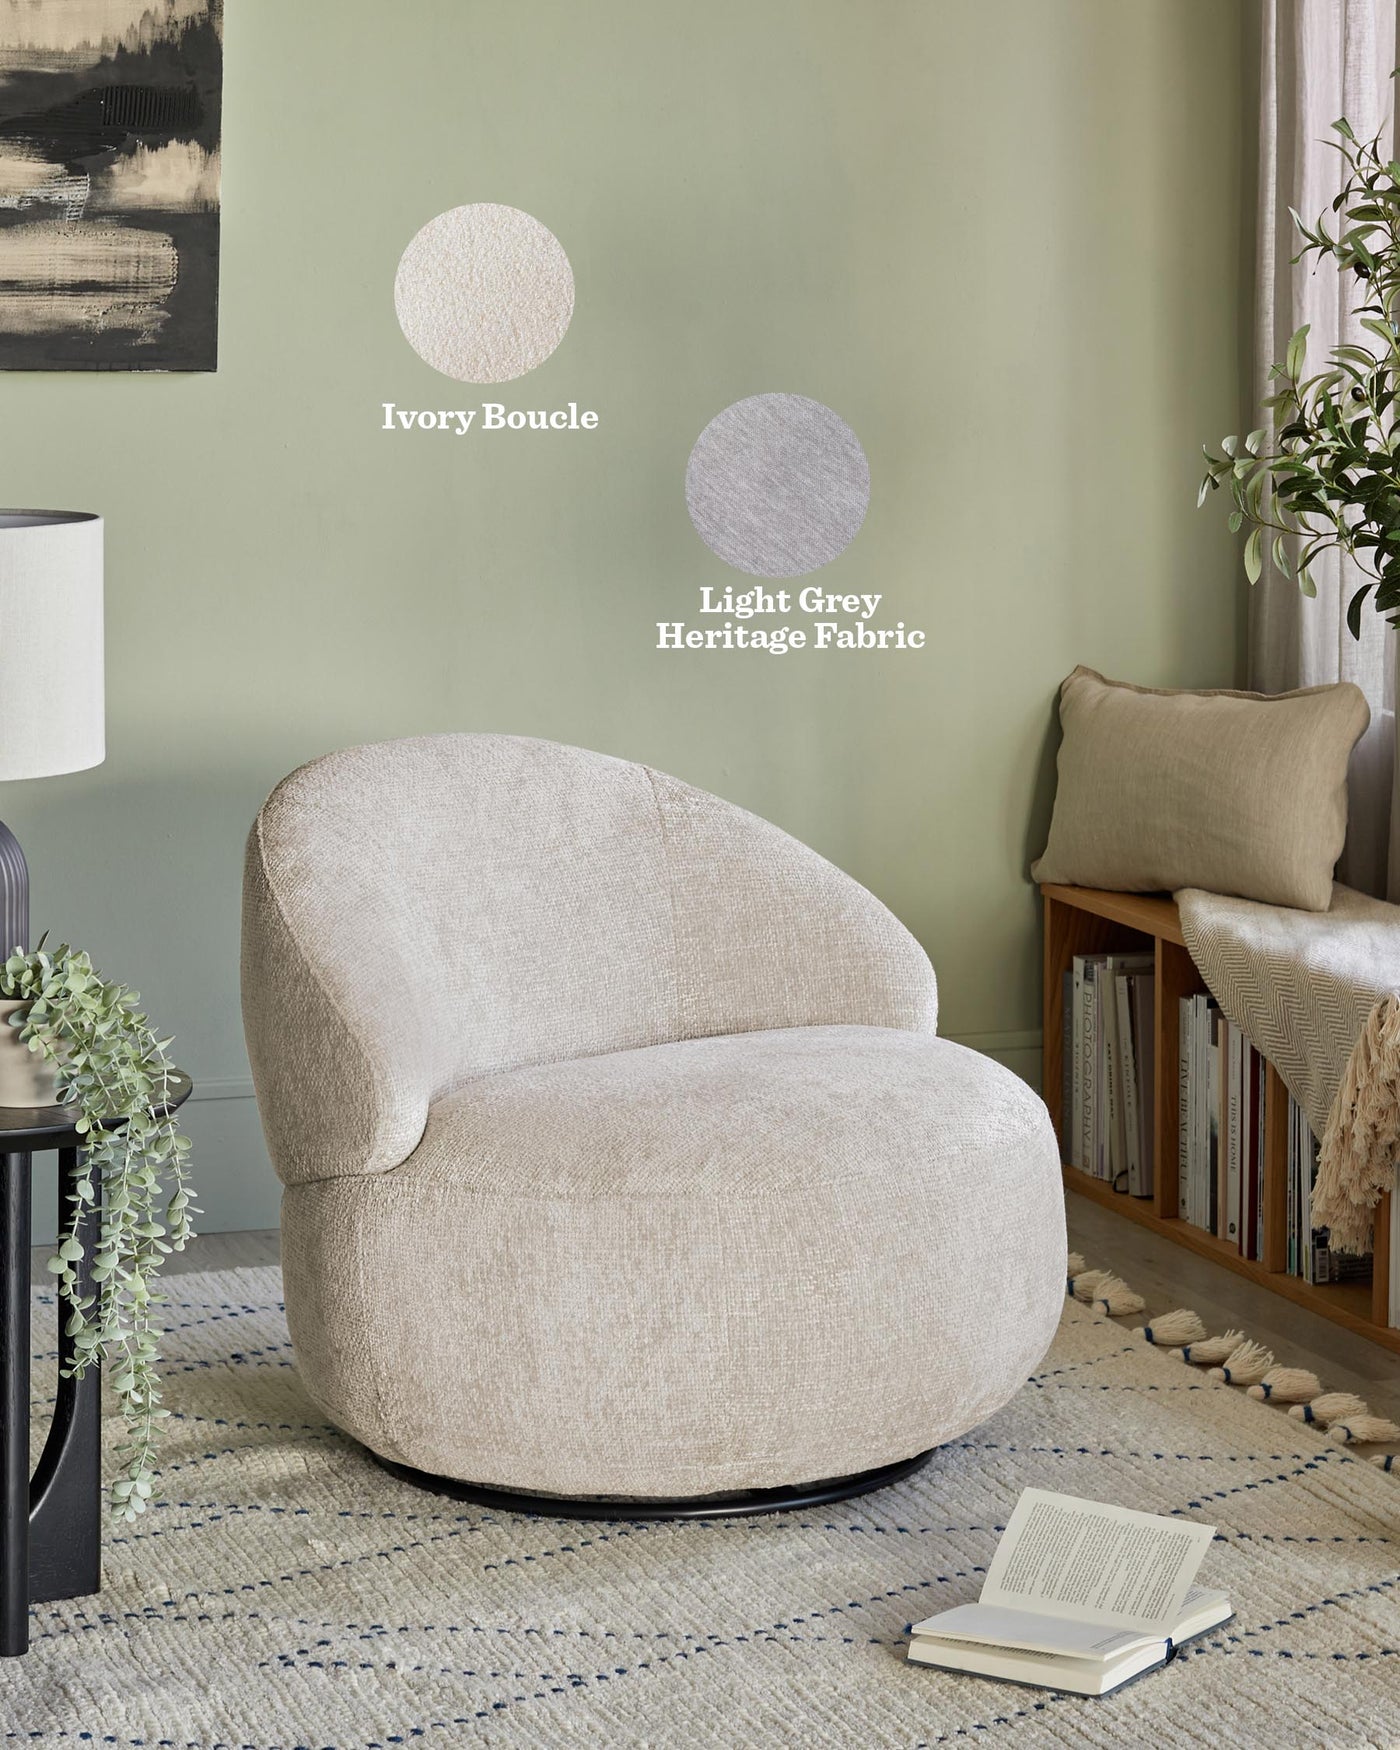 Modern textured fabric swivel chair in ivory boucle, paired with a simple black side table and a neutral toned woven area rug. The room also includes a floor lamp with a white shade and a cosy corner reading nook with books and a cushioned chair with a linen throw pillow.